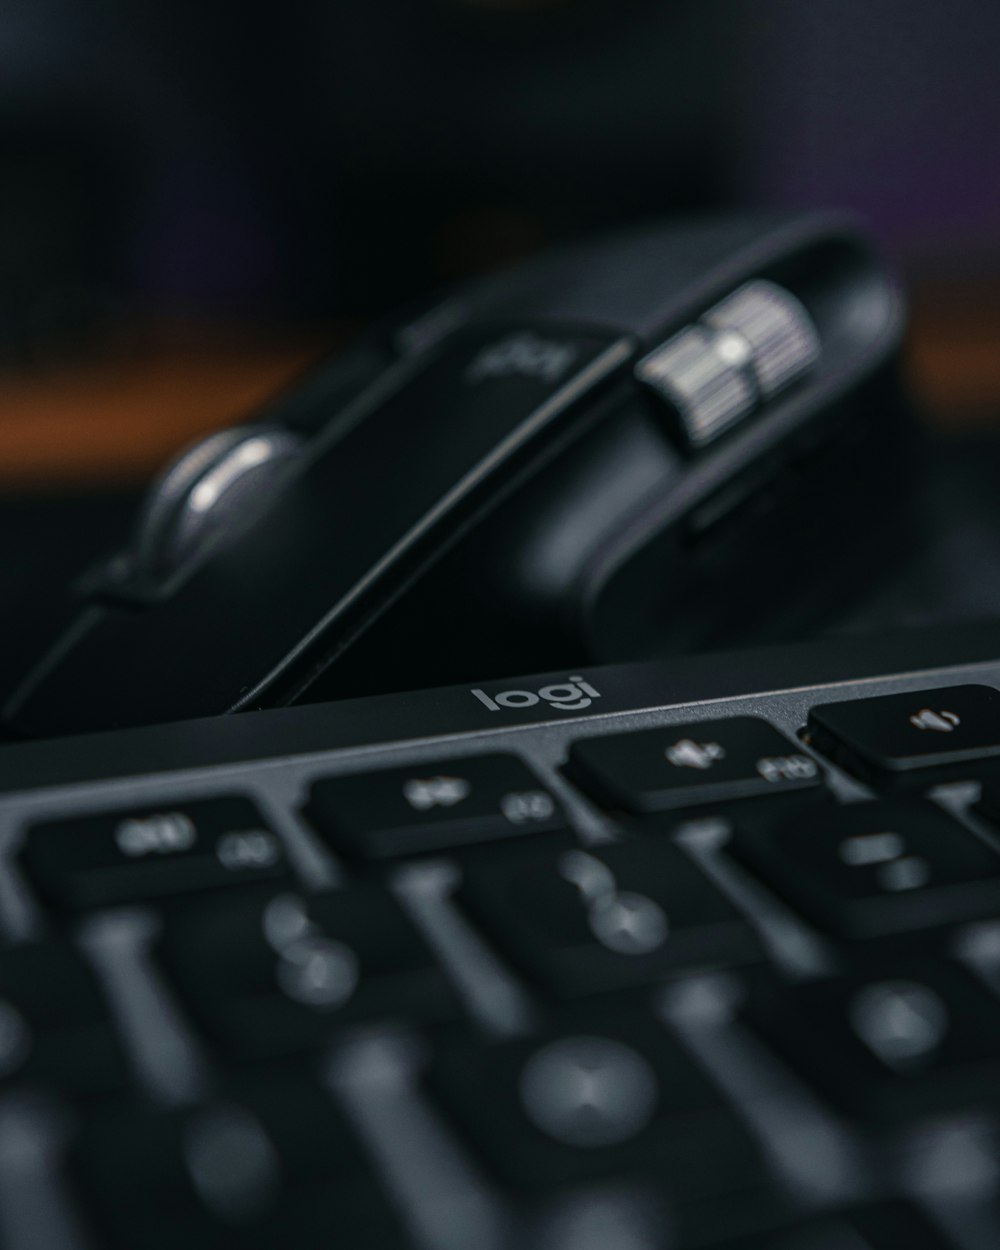 a close up of a keyboard and a mouse